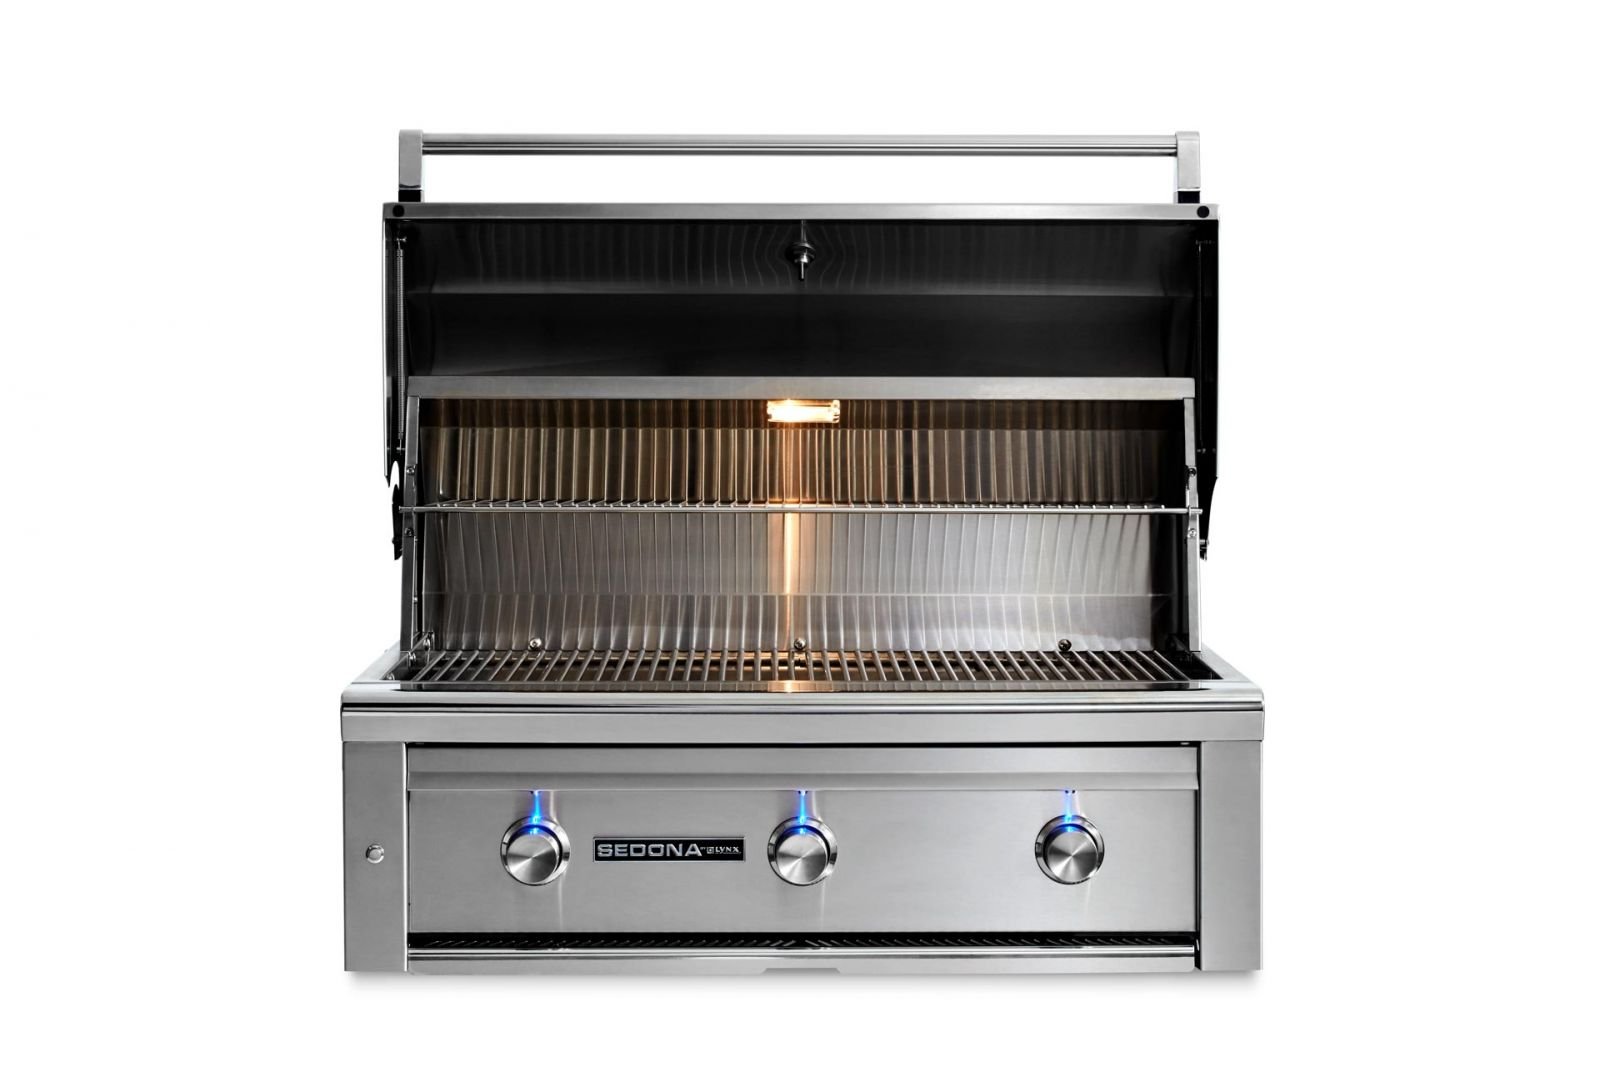 36" Built-in Grill with 1 Prosear Burner and 2 Stainless Steel Burners (L600PS)